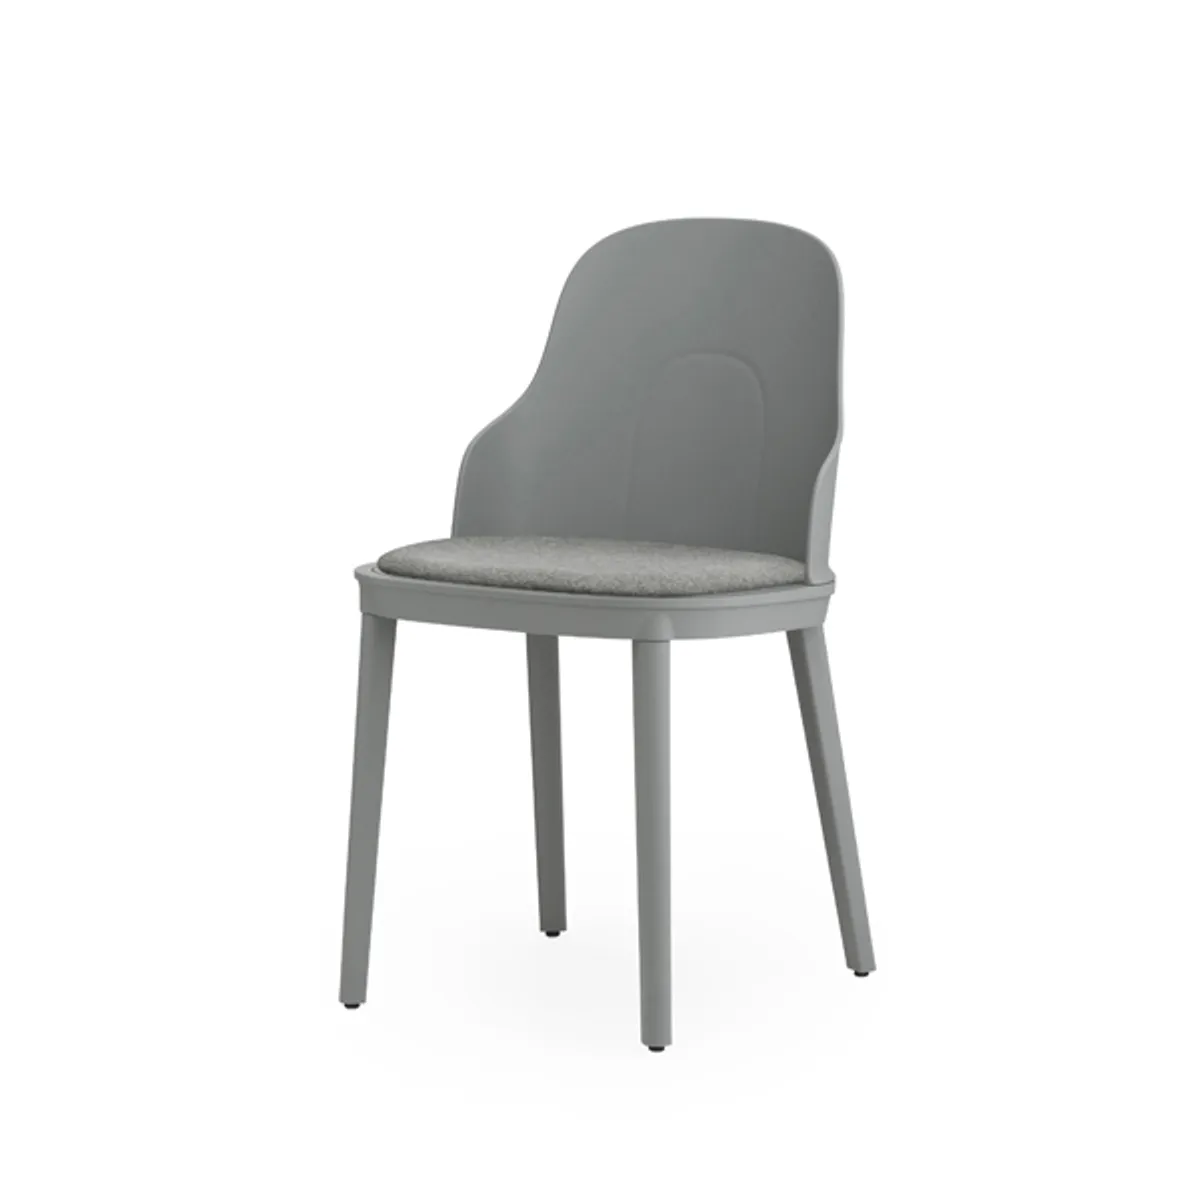 Bon soft poly chair Inside Out Contracts3